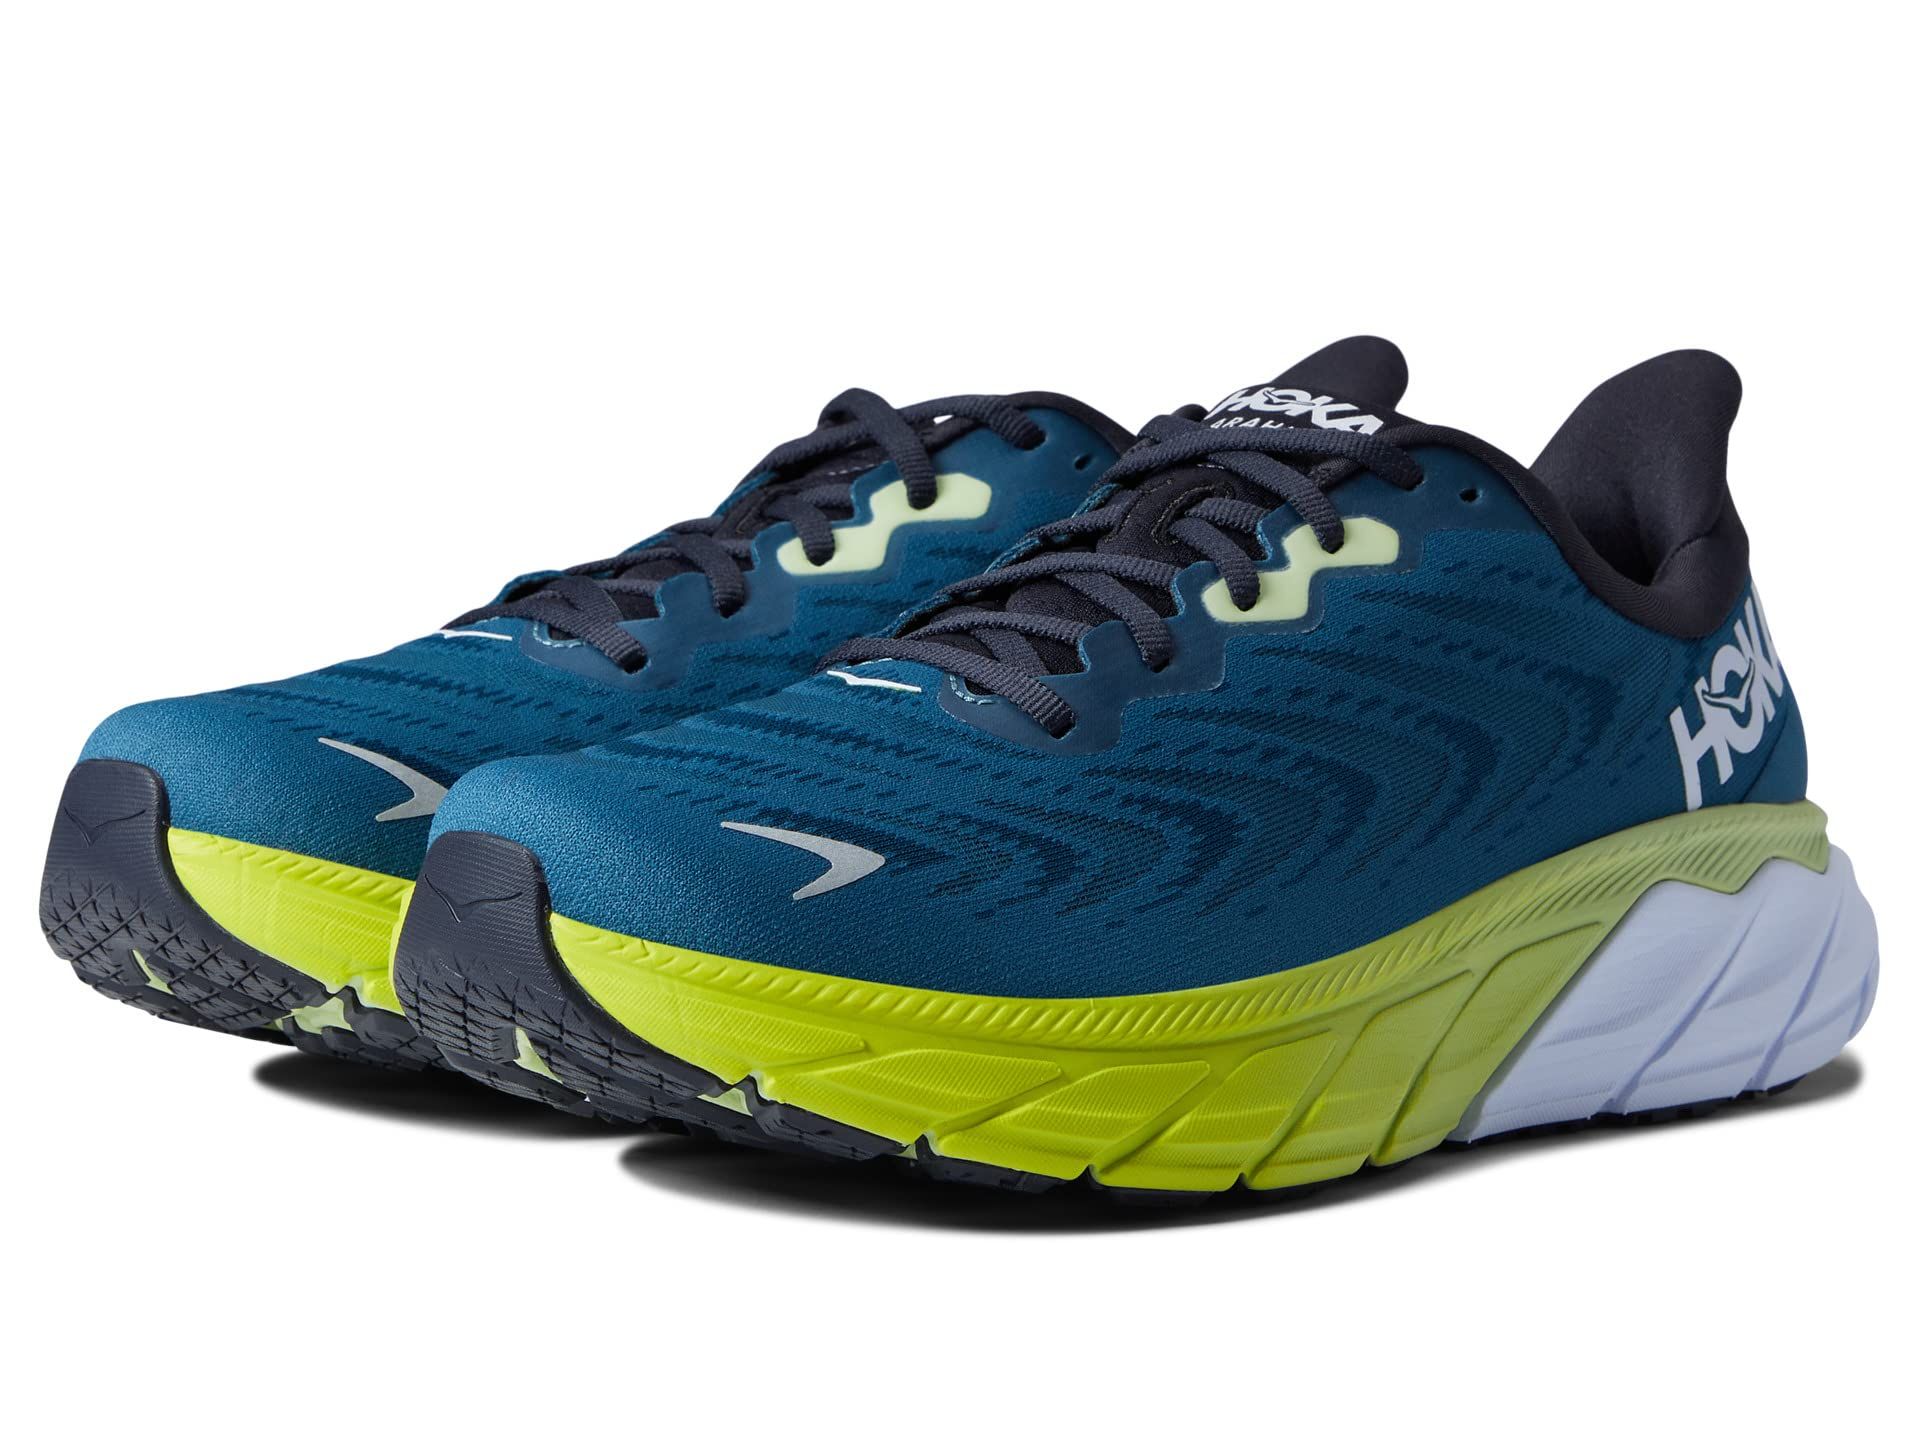 Are Hoka Running Shoes Good for Flat Feet?